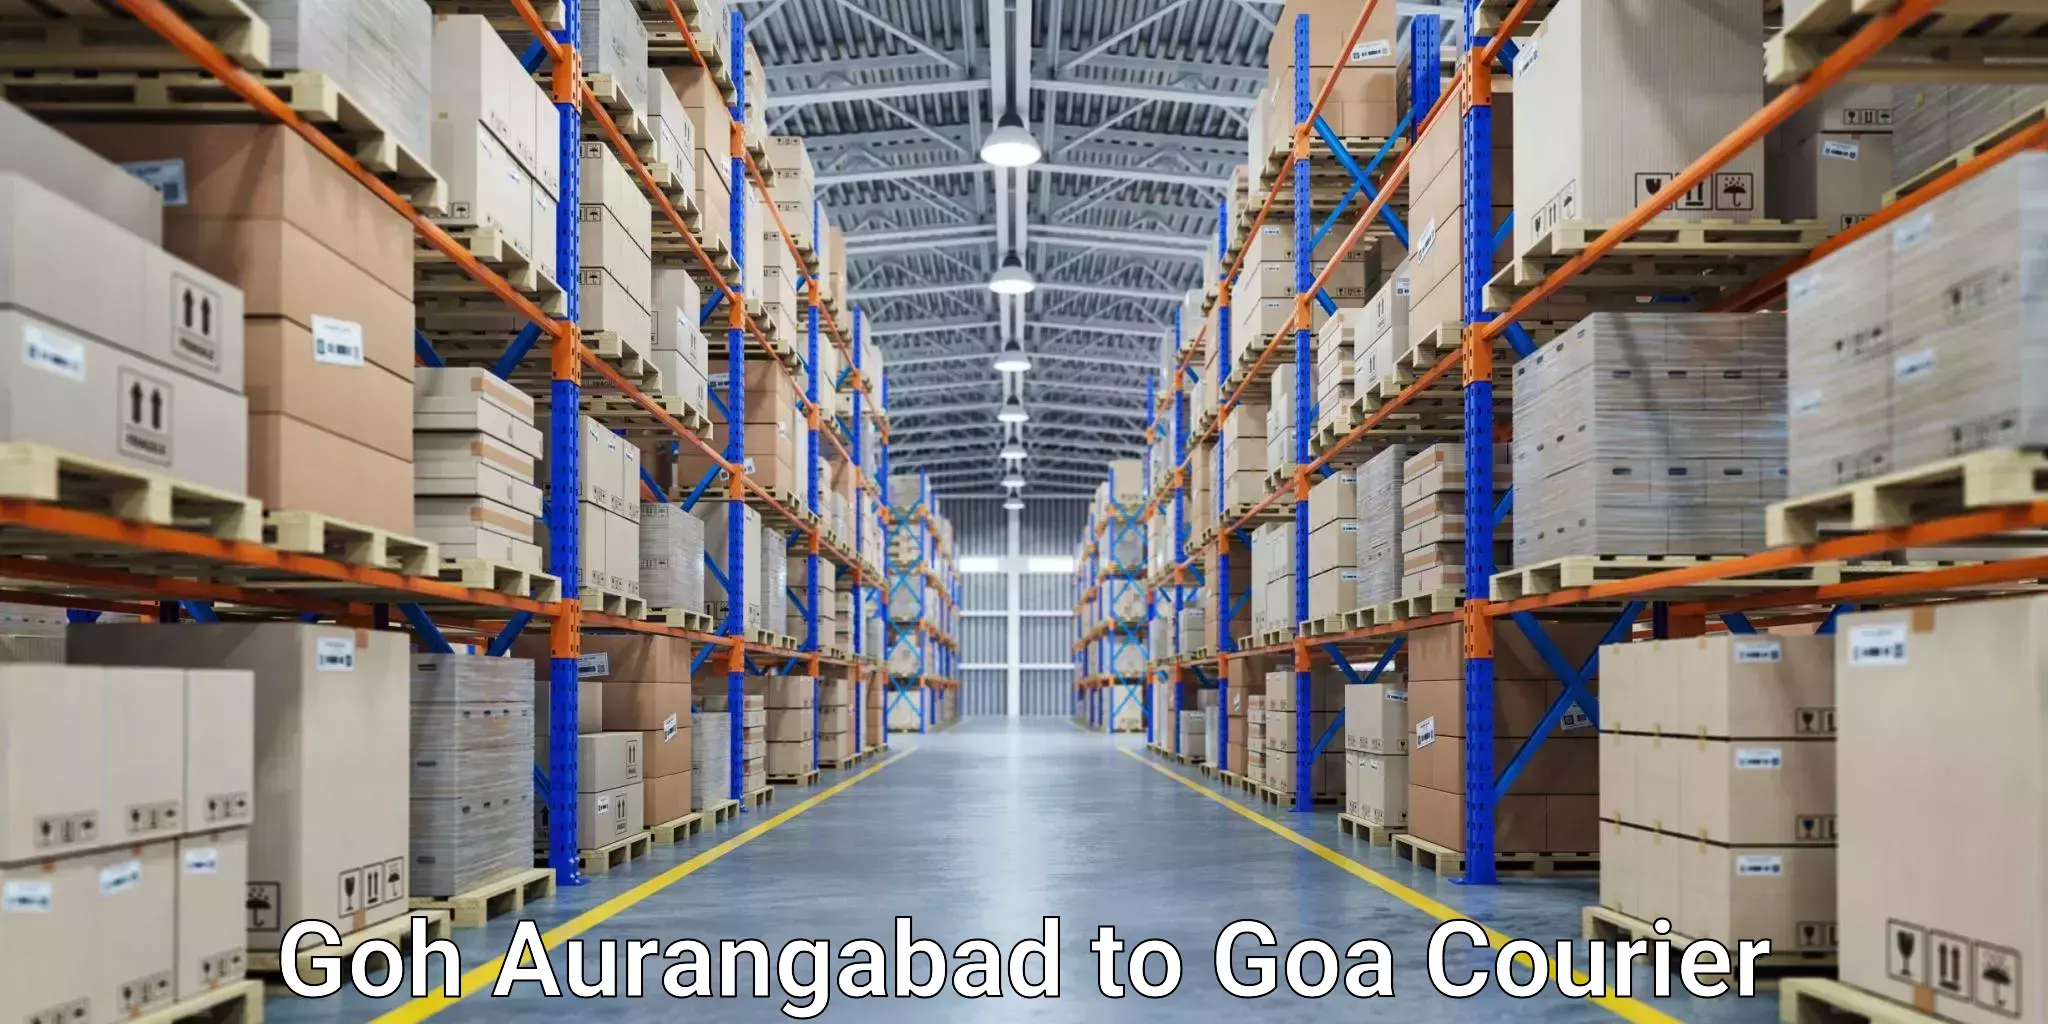 Fast-track shipping solutions Goh Aurangabad to South Goa